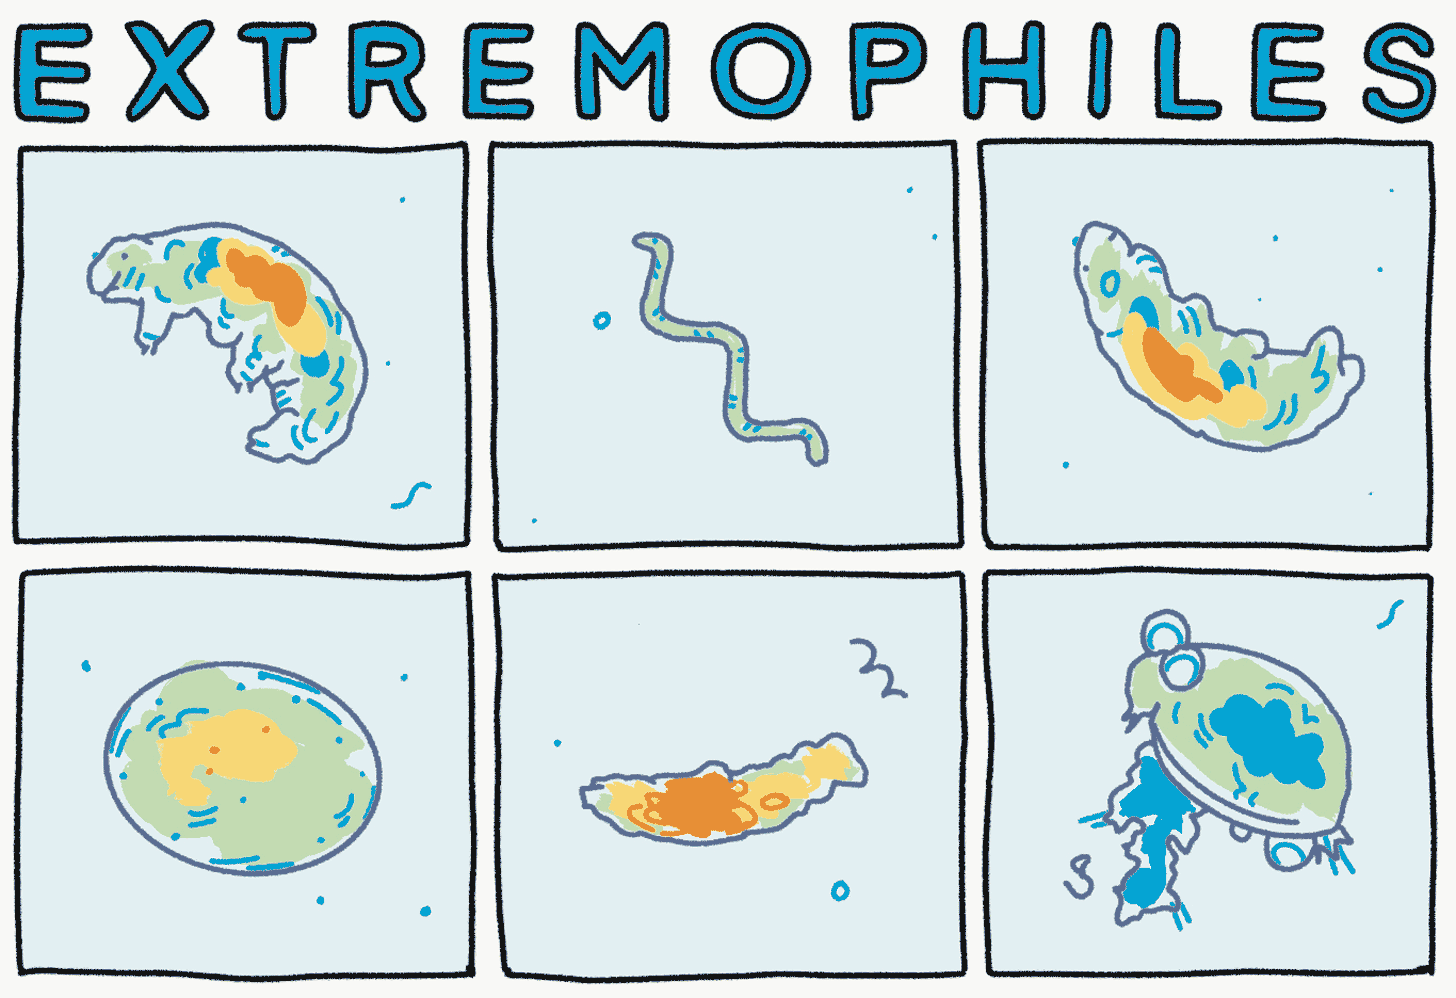 Illustrations of extremophiles which live on Antarctica, as originally photographed by Ariel Waldman 